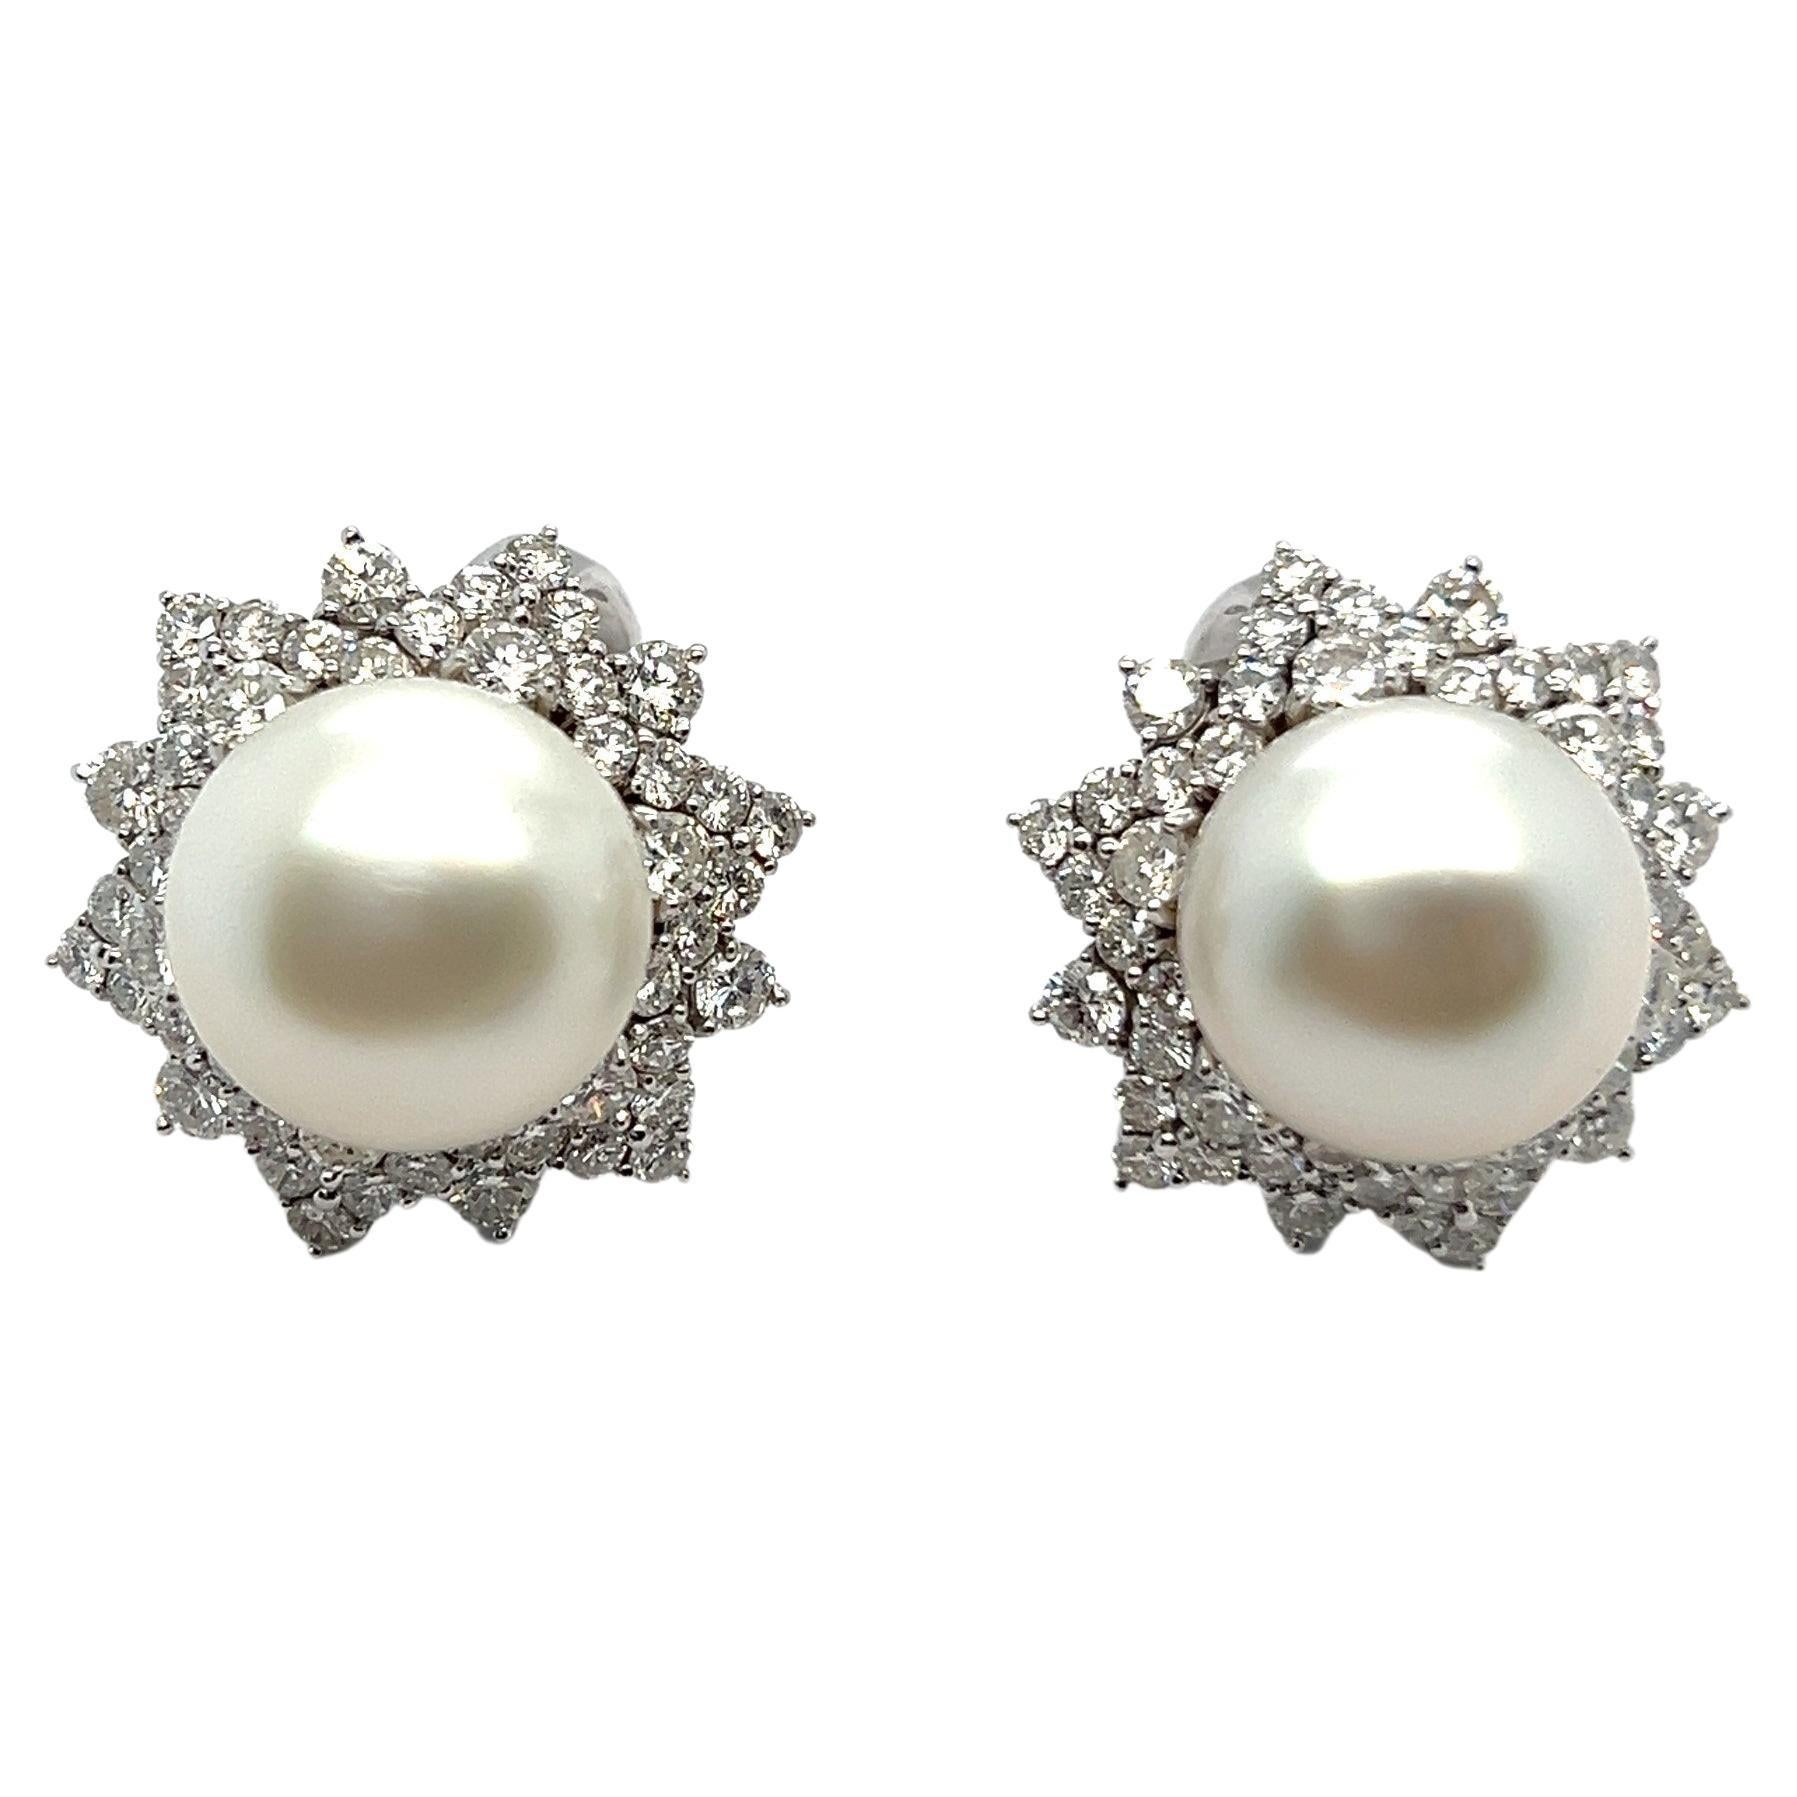 Step into celestial elegance with our stunning Pearl Earrings by Meister. Crafted in luminous 18-karat white gold, these earrings blend refinement and luxury seamlessly. At the center of each earring, ethereal South Sea cultural pearl. Encircling